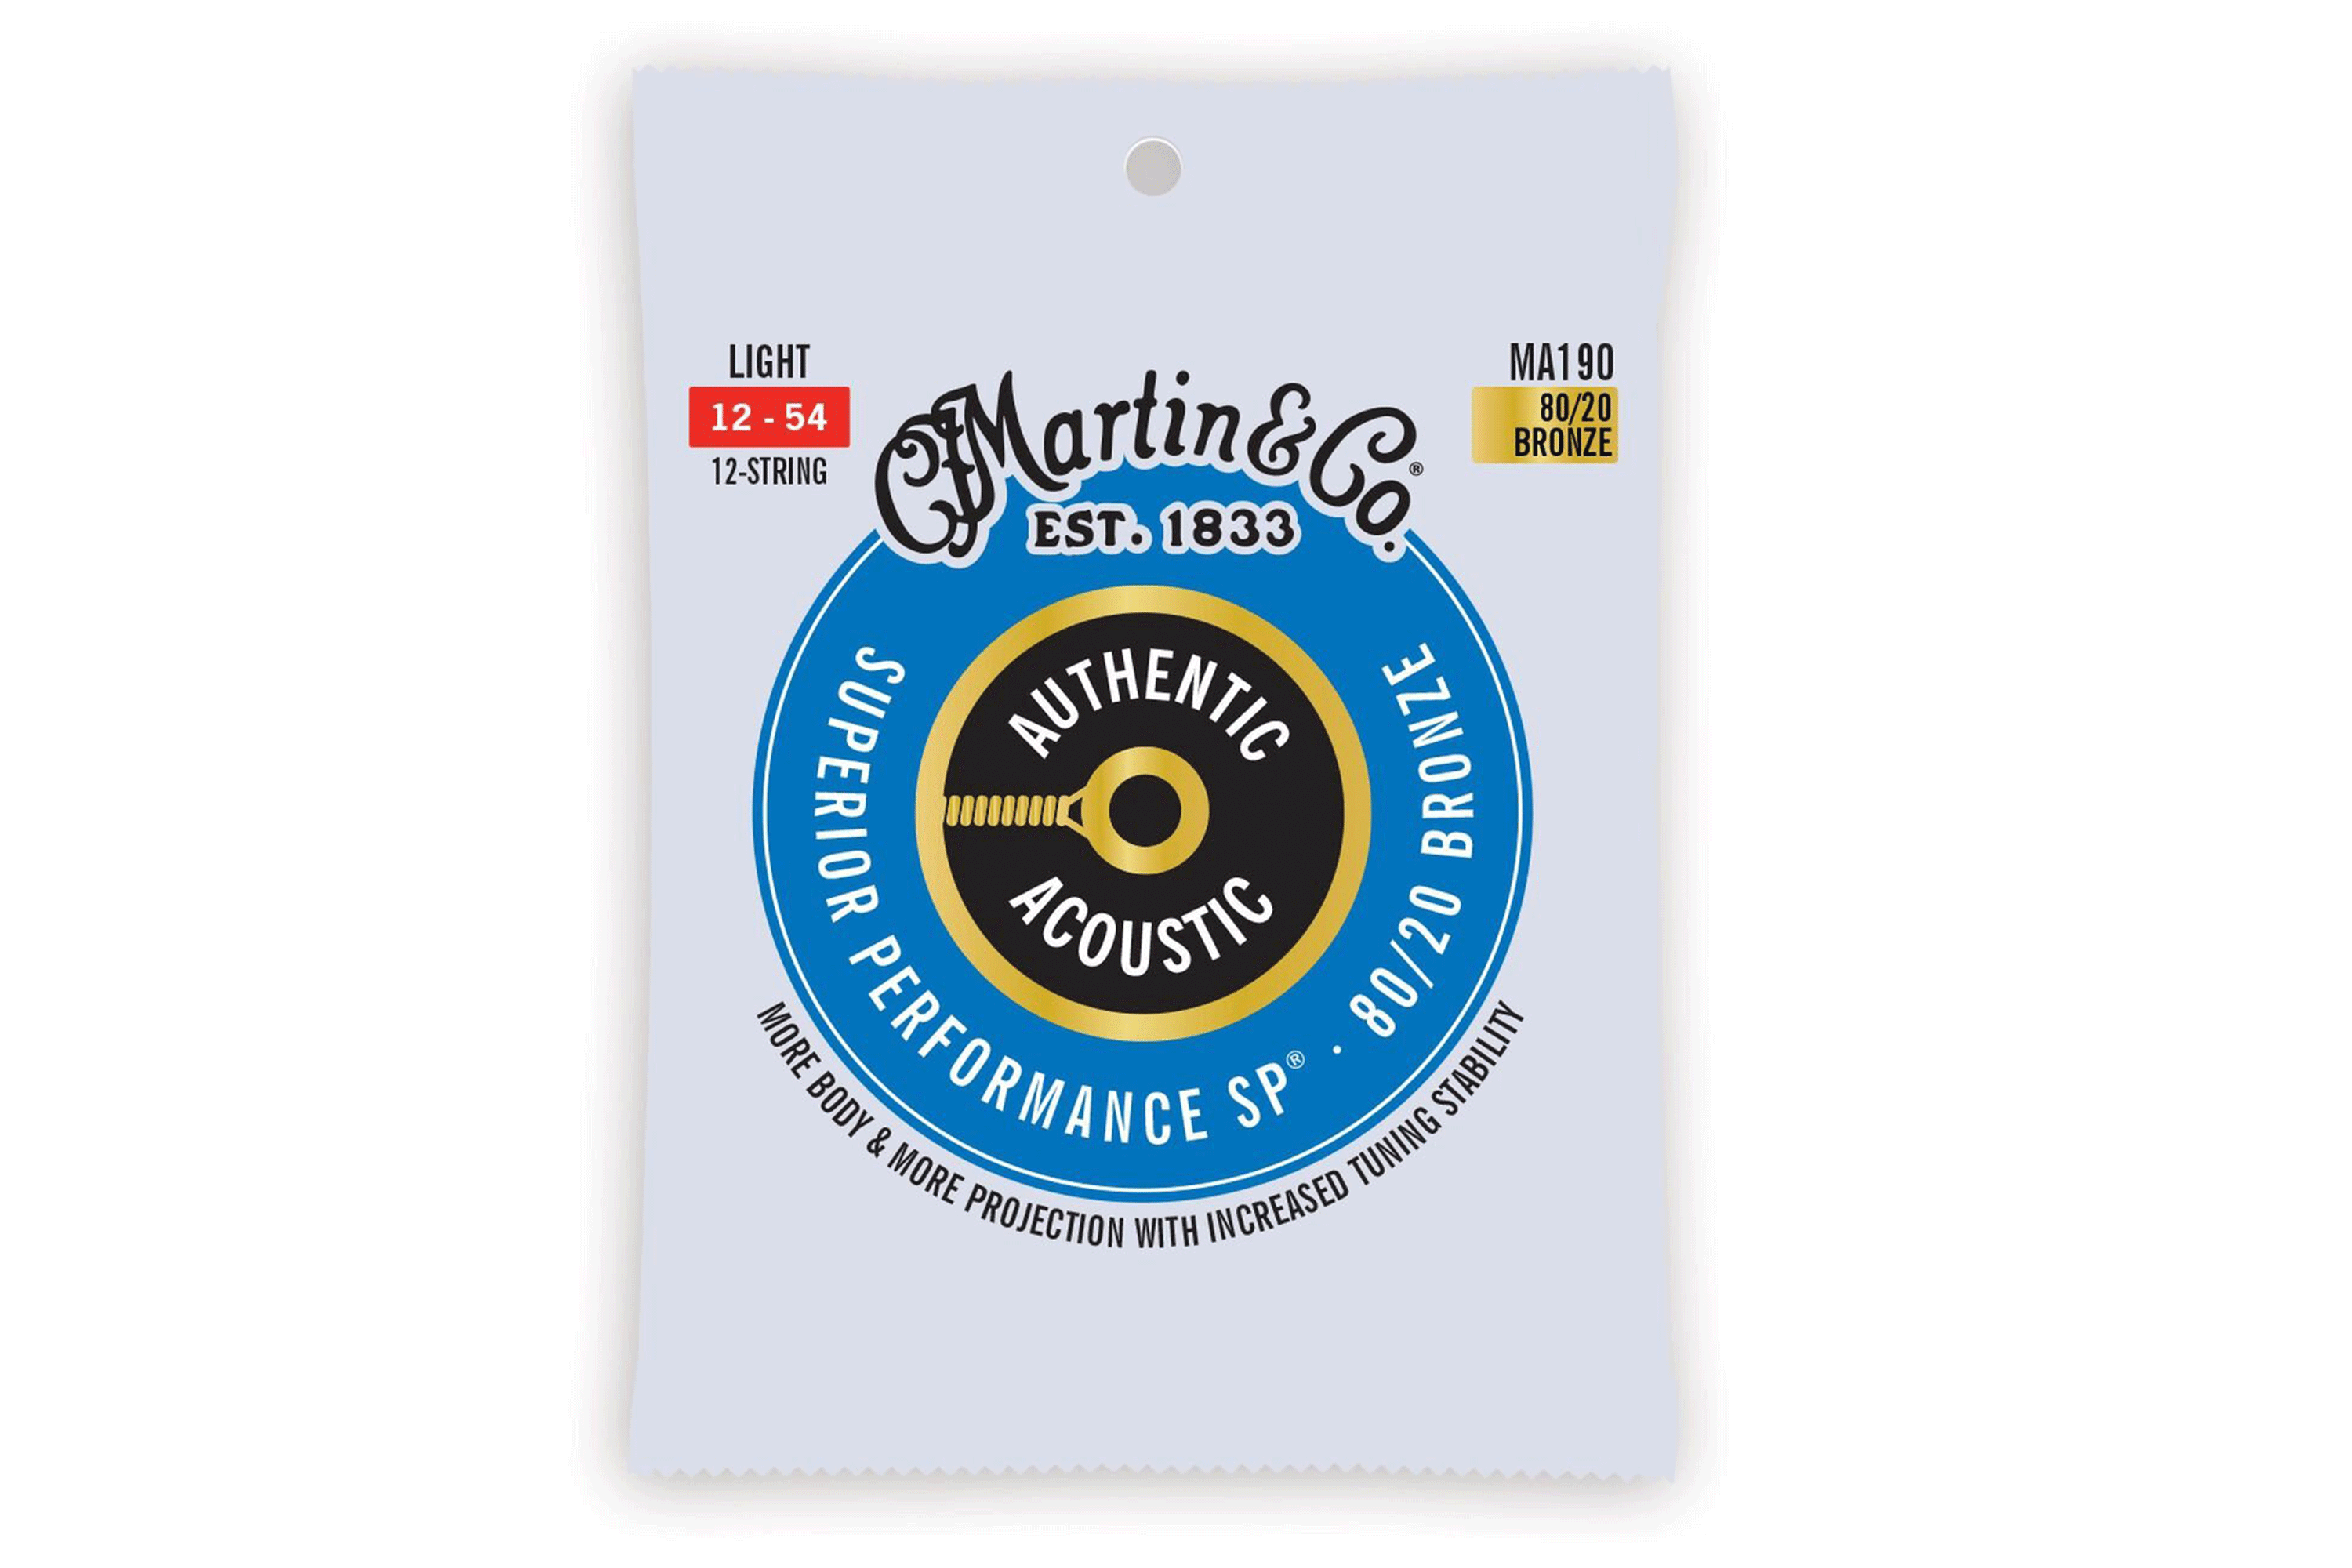 Martin MA190 Authentic Acoustic SP 80/20 Bronze Guitar Strings - .012-.054 Light 12-string